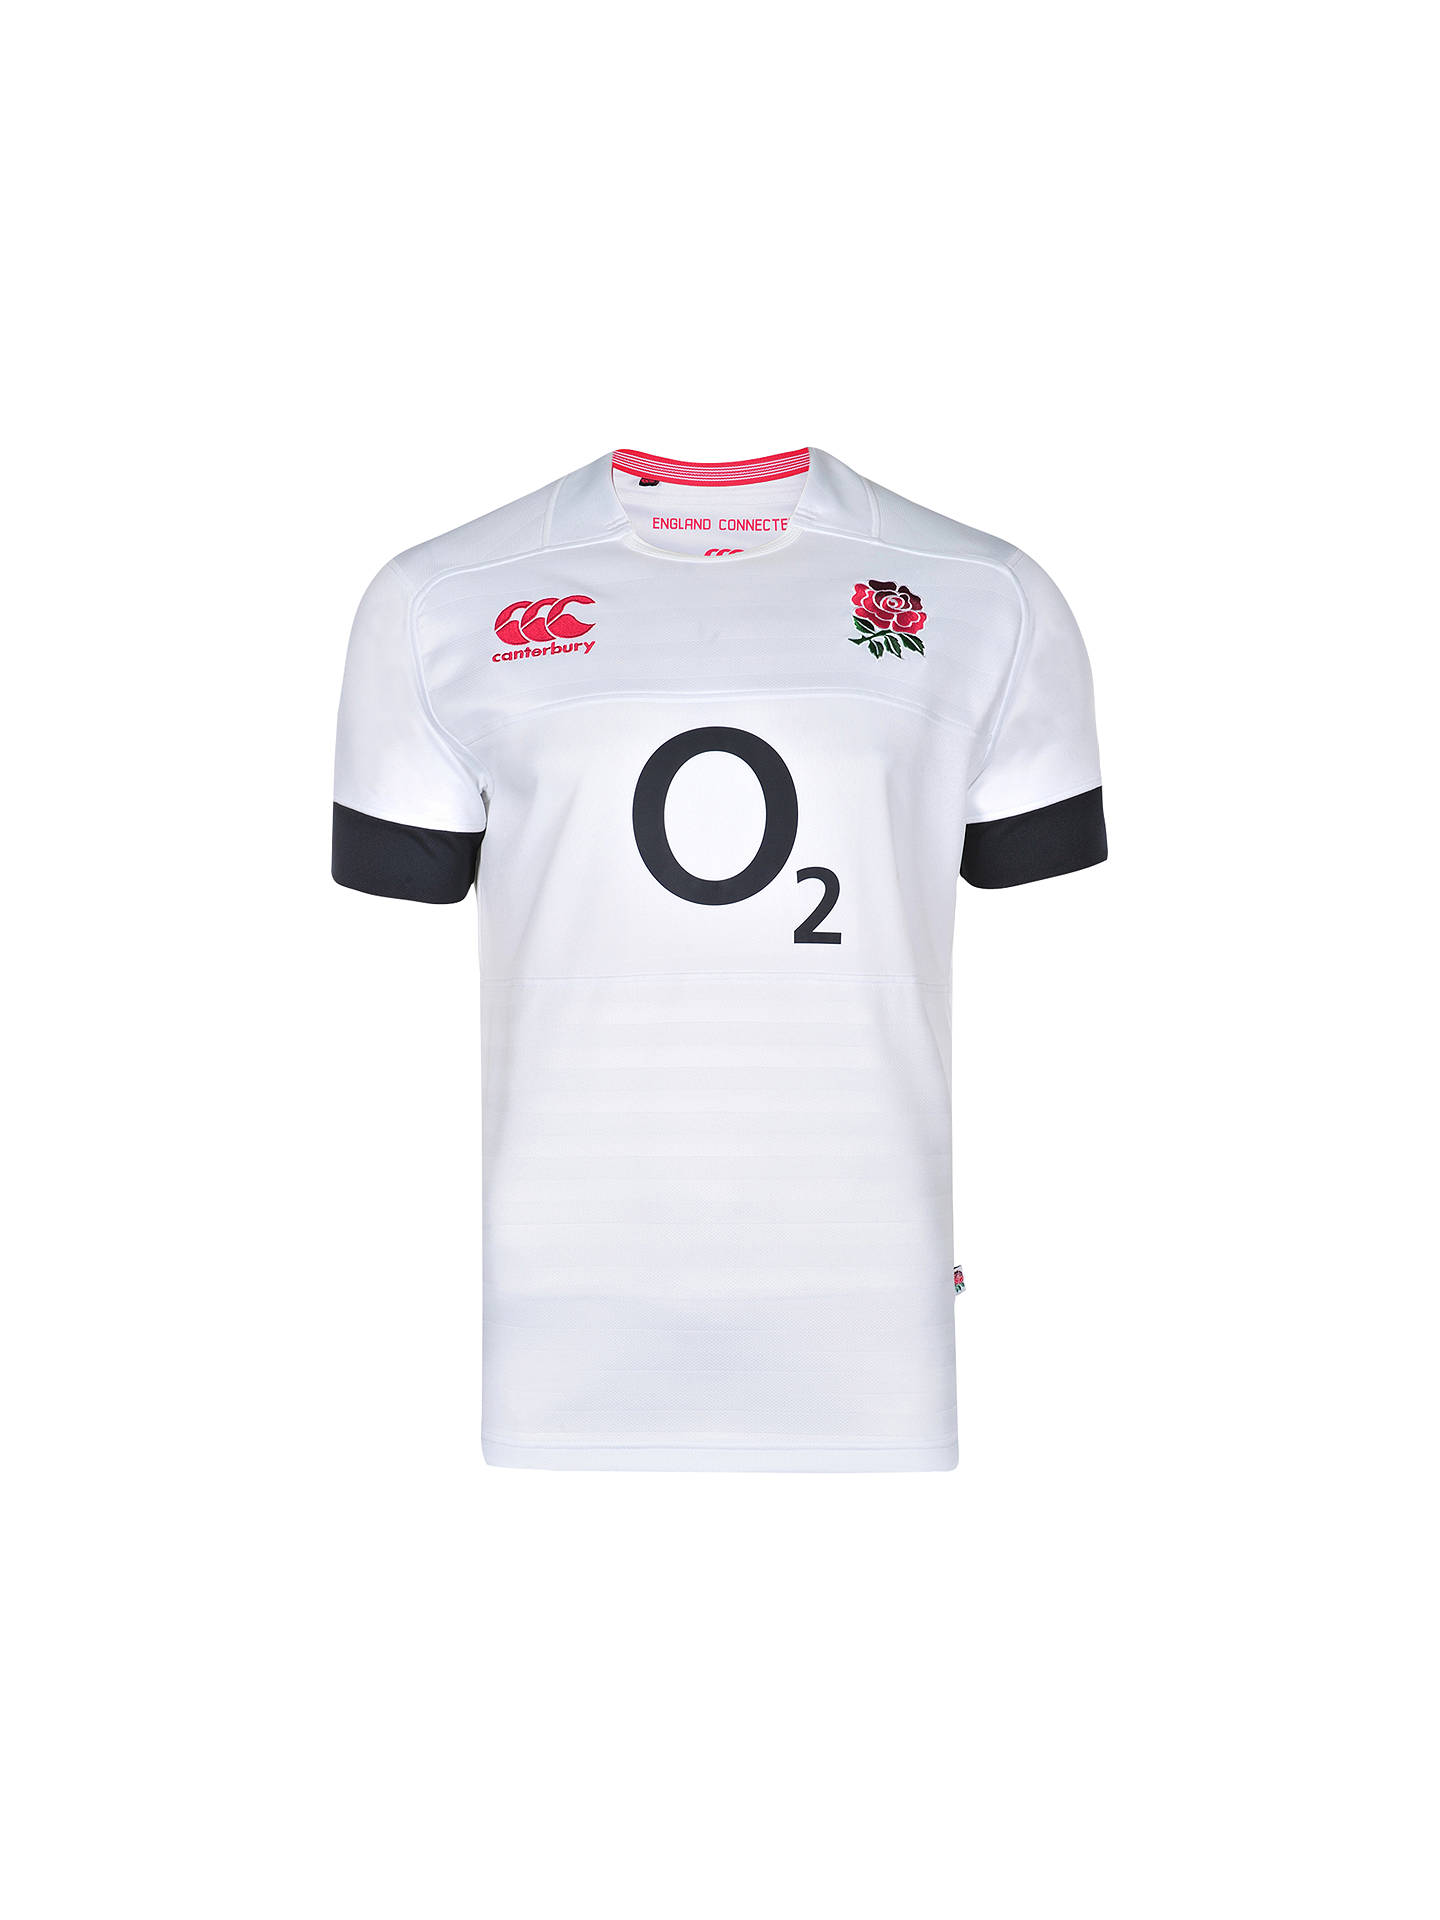 Canterbury Of New Zealand England Rugby Replica Home Pro Shirt